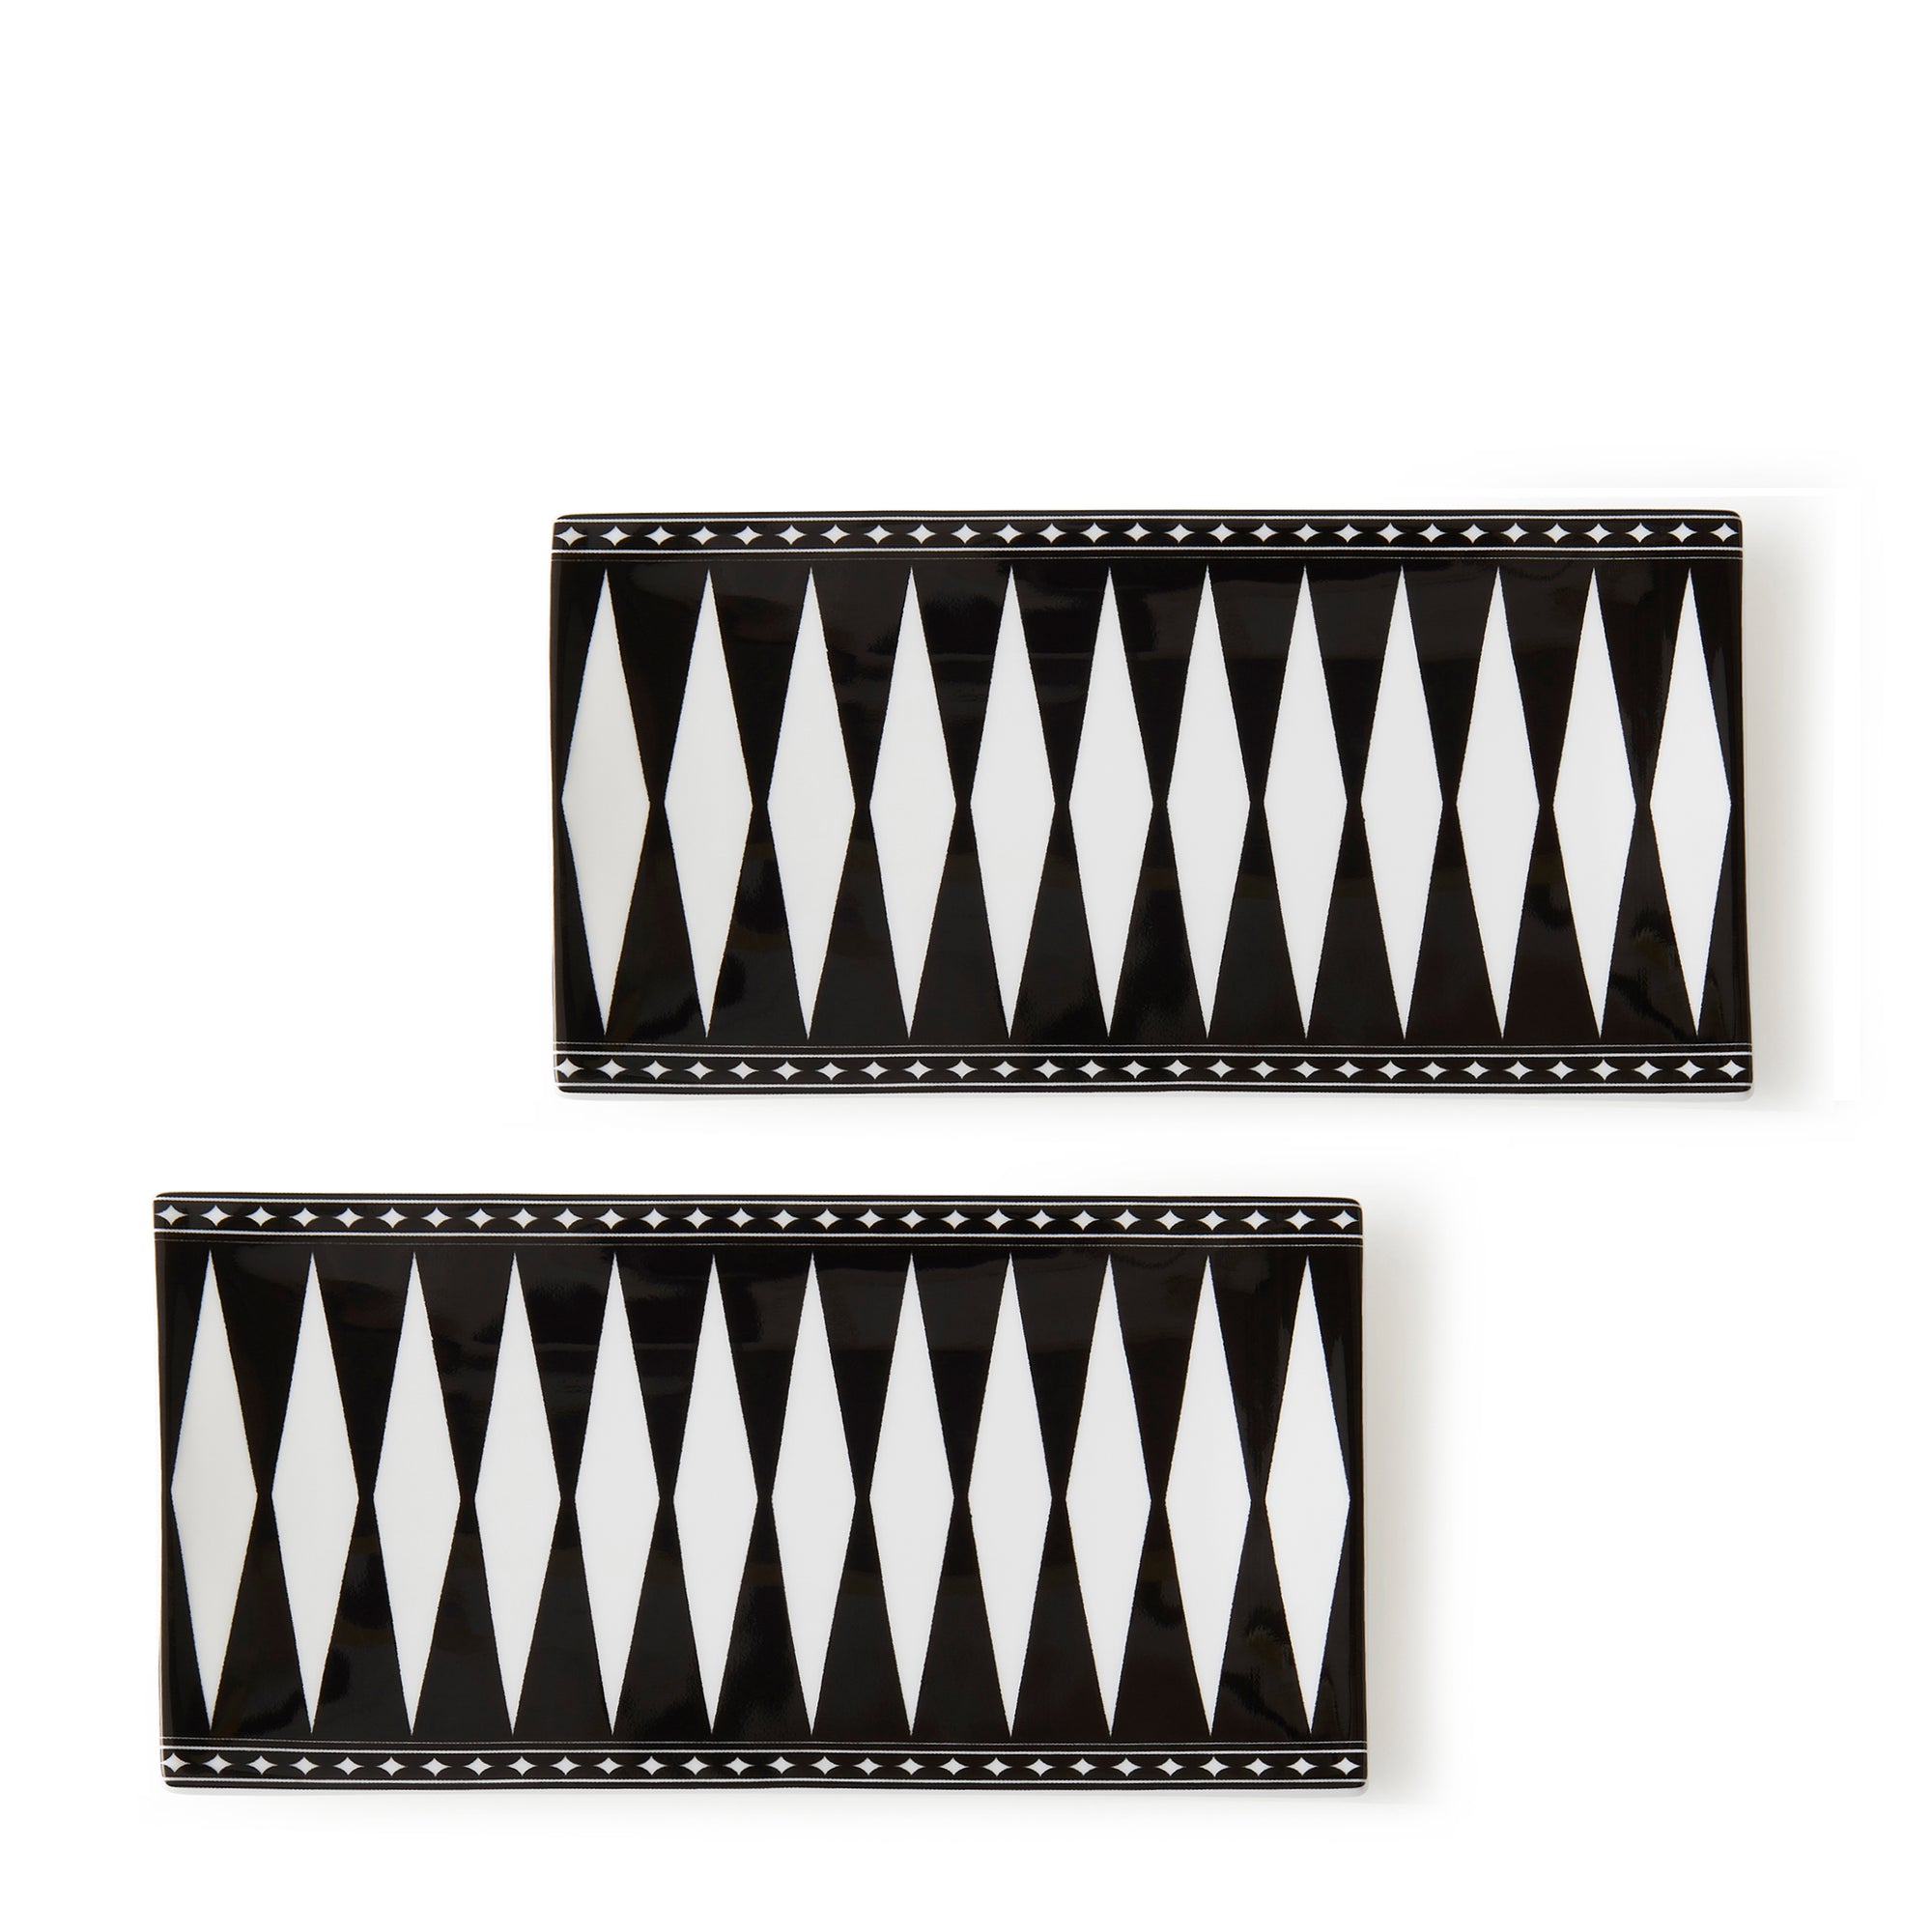 Two rectangular bone china plates feature black and white geometric diamond patterns with star accents along the borders, evoking an Art Deco elegance reminiscent of Caskata's Marrakech Medium Sushi Trays, Set of 2.